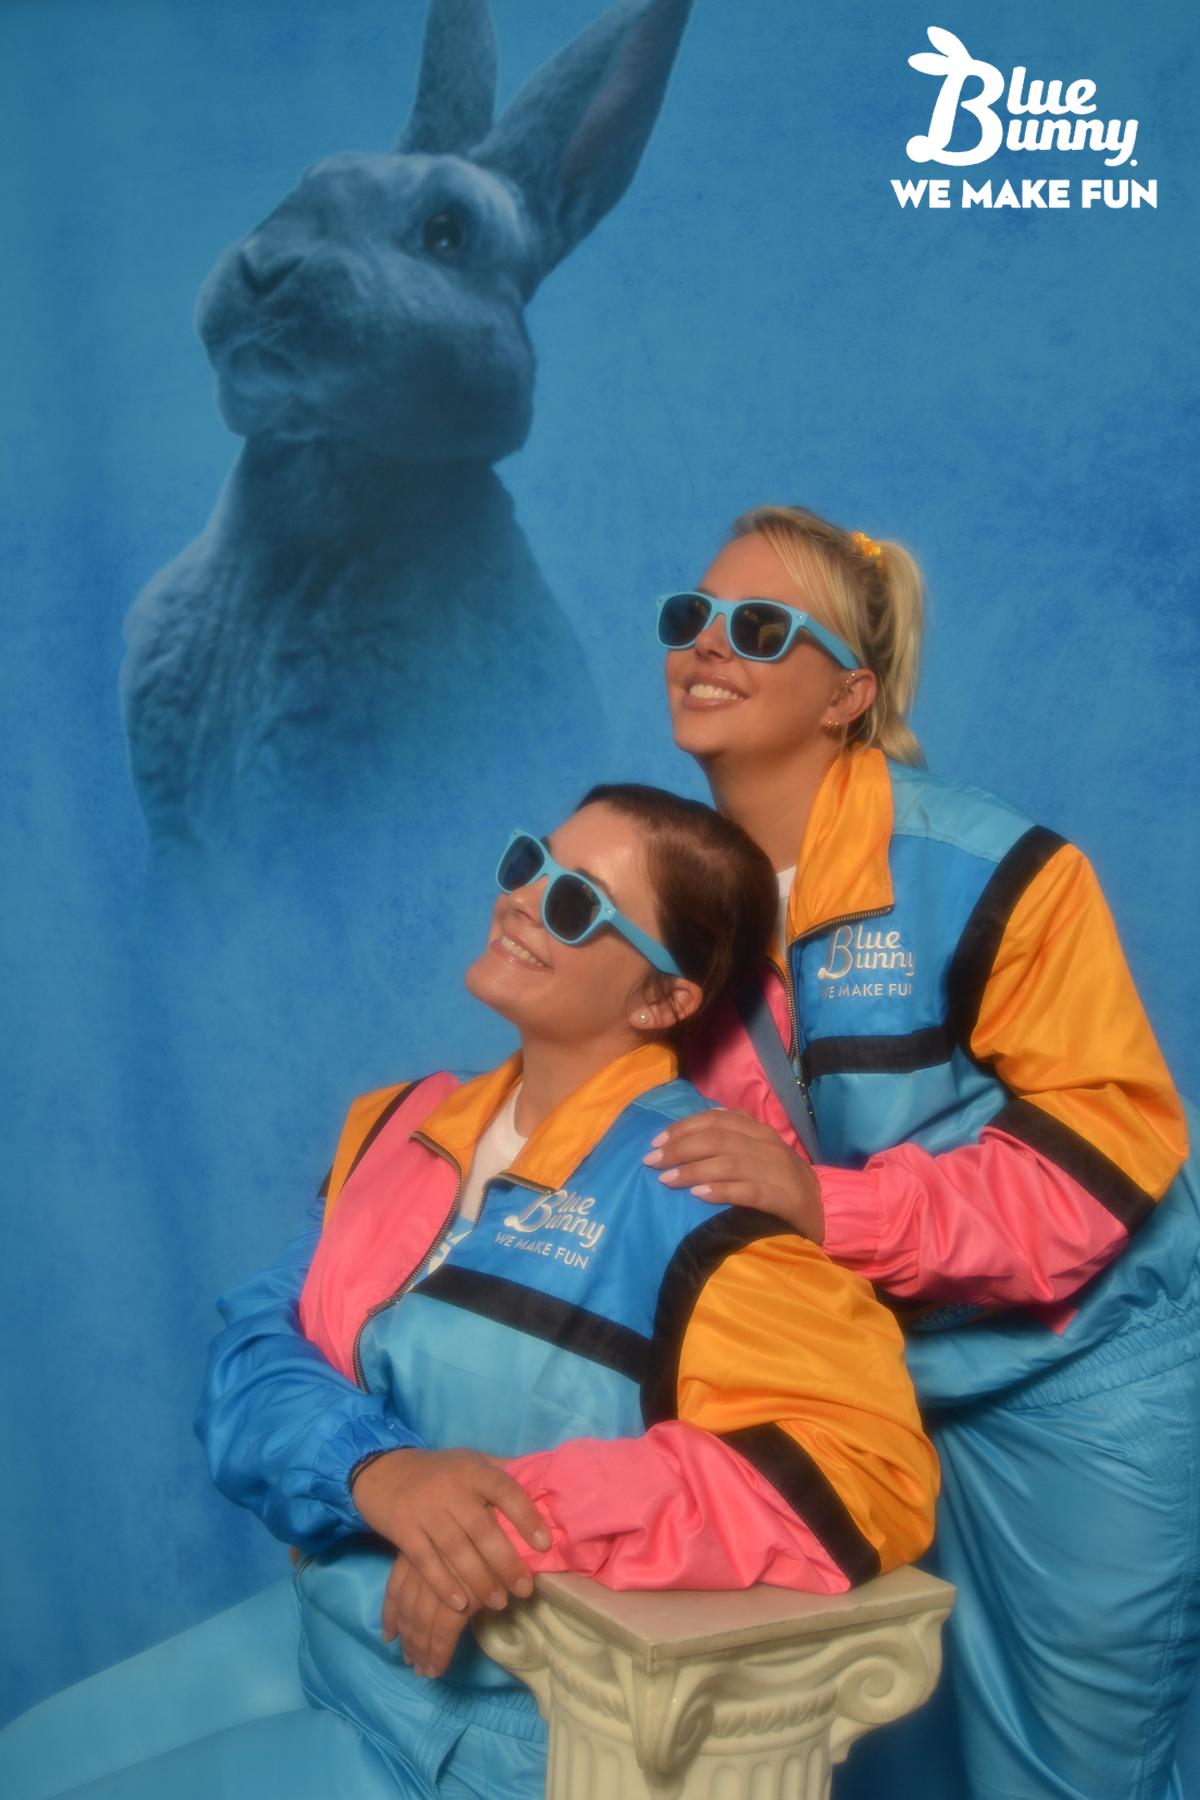 Two woman in sweatsuits looking off into the distance